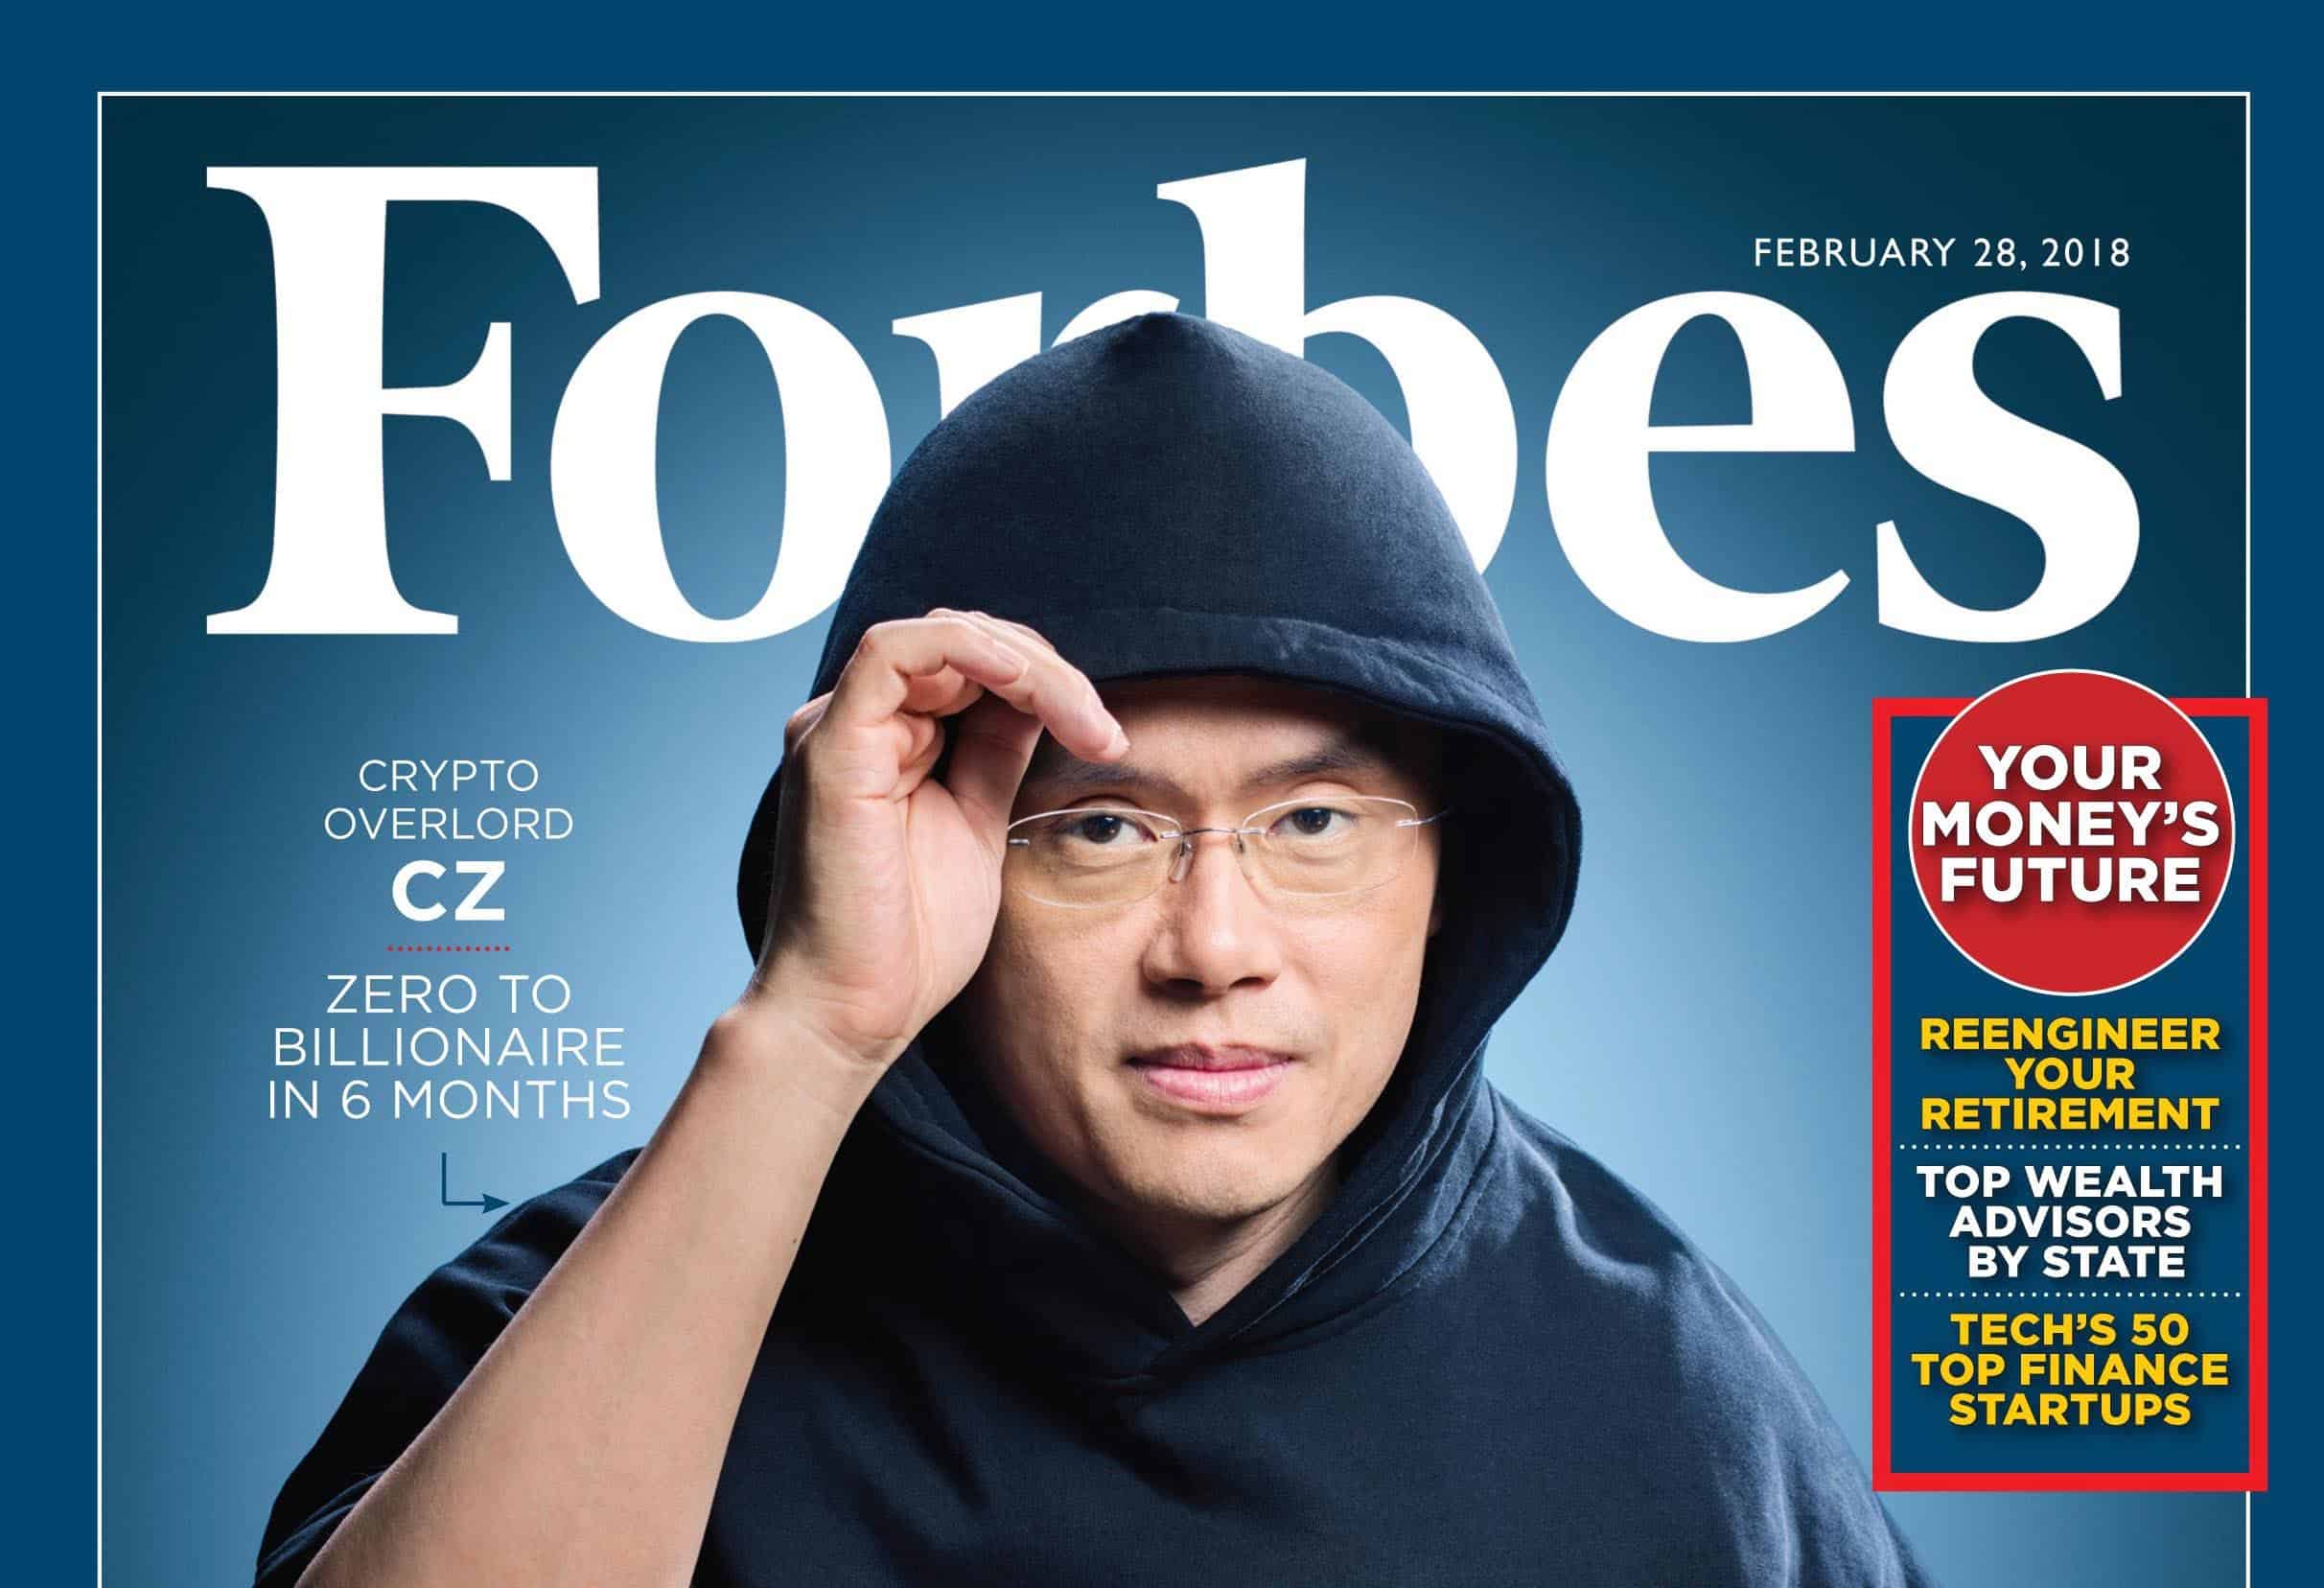 Crypto exchange Binance is taking a $200m stake in Forbes